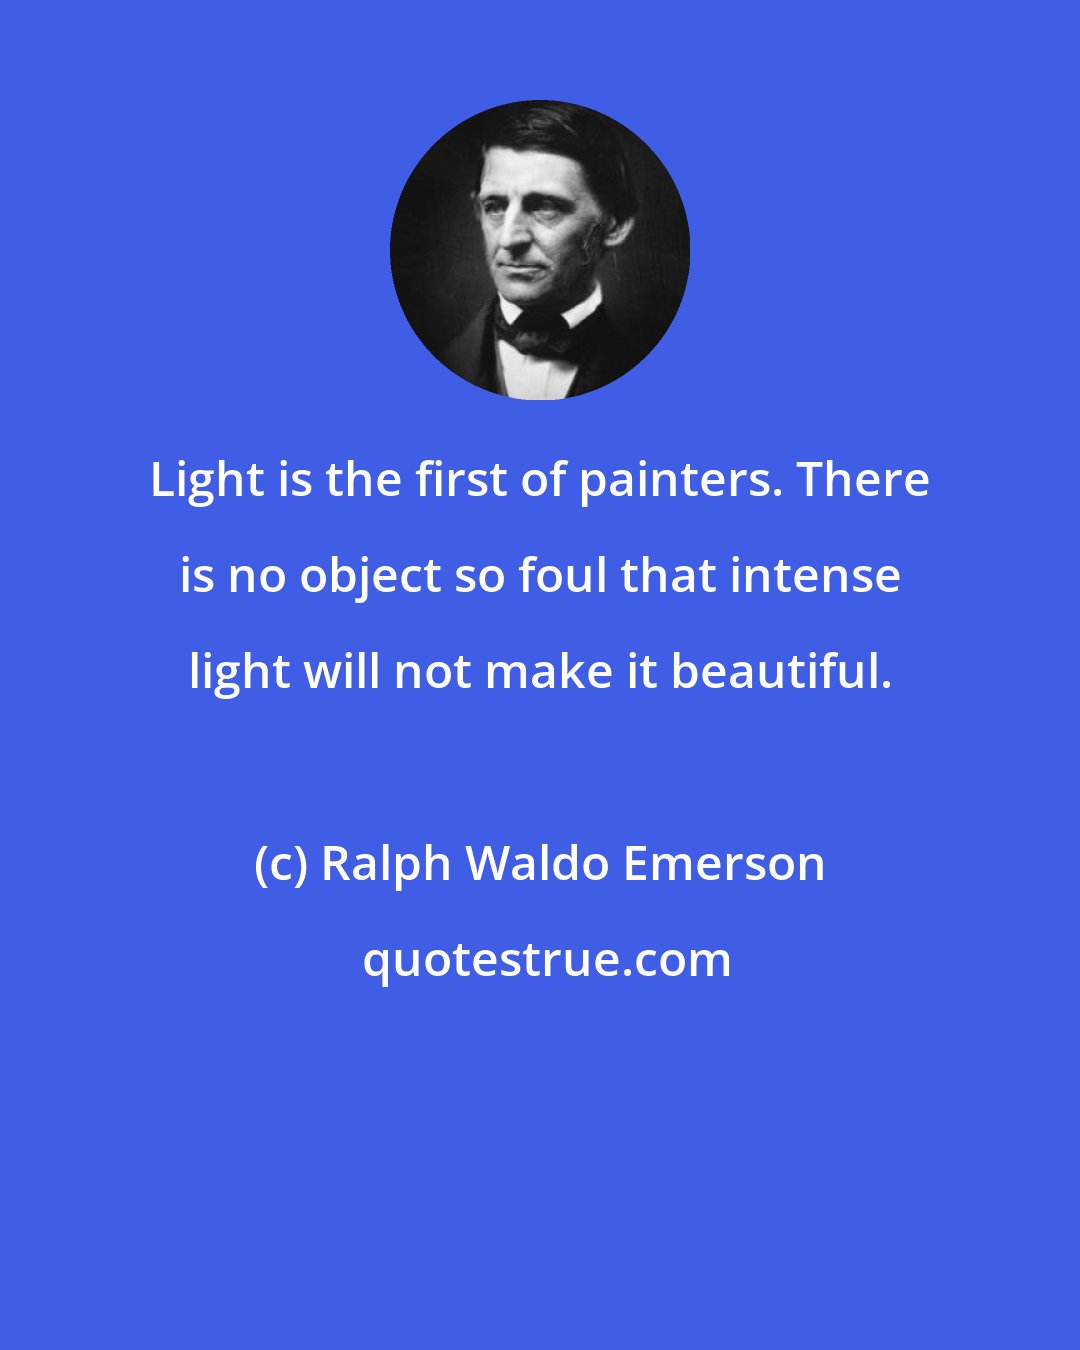 Ralph Waldo Emerson: Light is the first of painters. There is no object so foul that intense light will not make it beautiful.